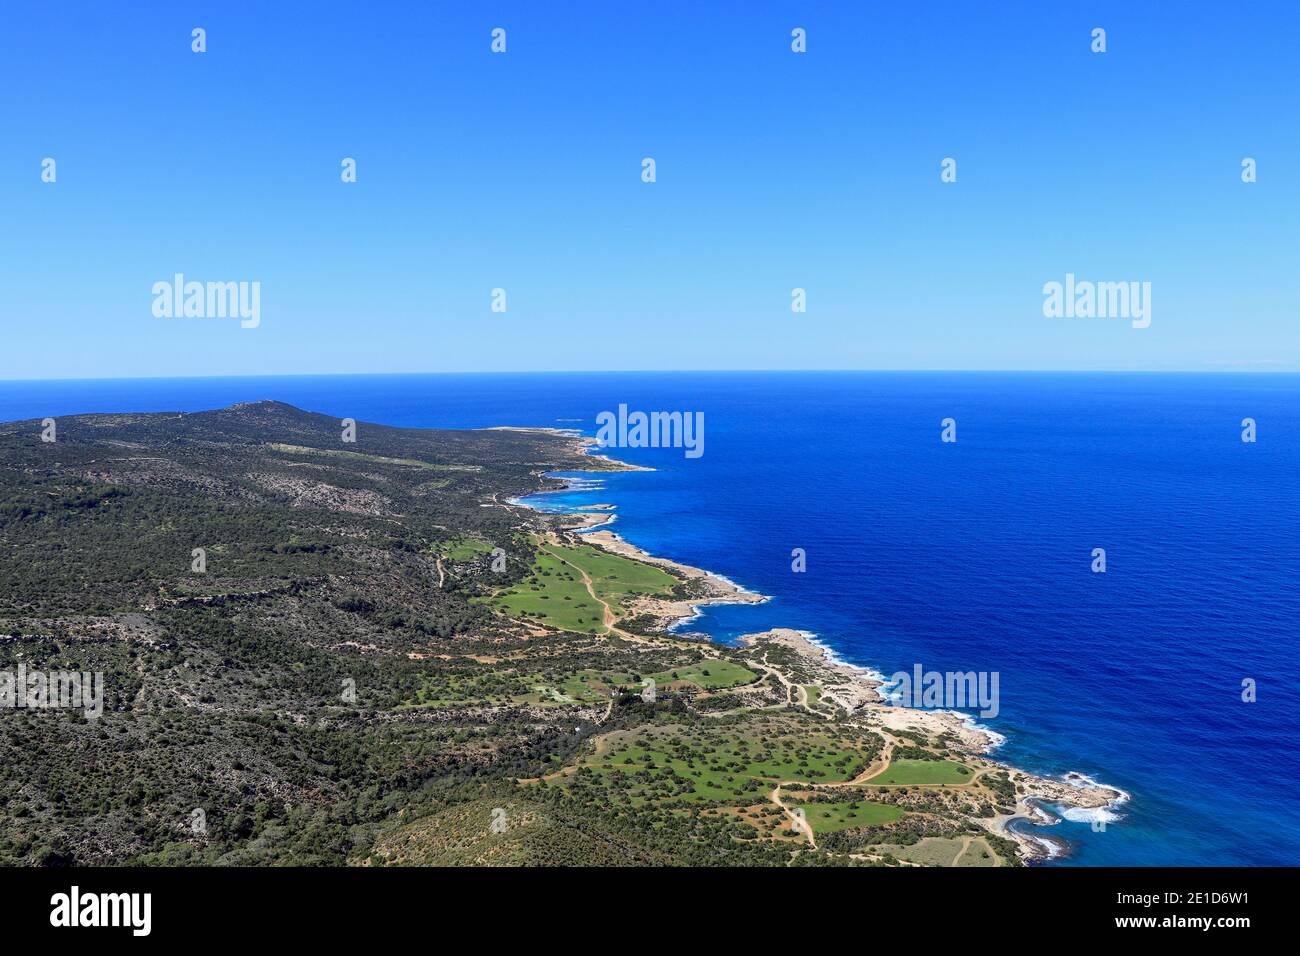 View on part of Cypriot island in South europe, Specifically on Akamas peninsula national park with lagoons and beautiful clear sand beach and dark se Stock Photo